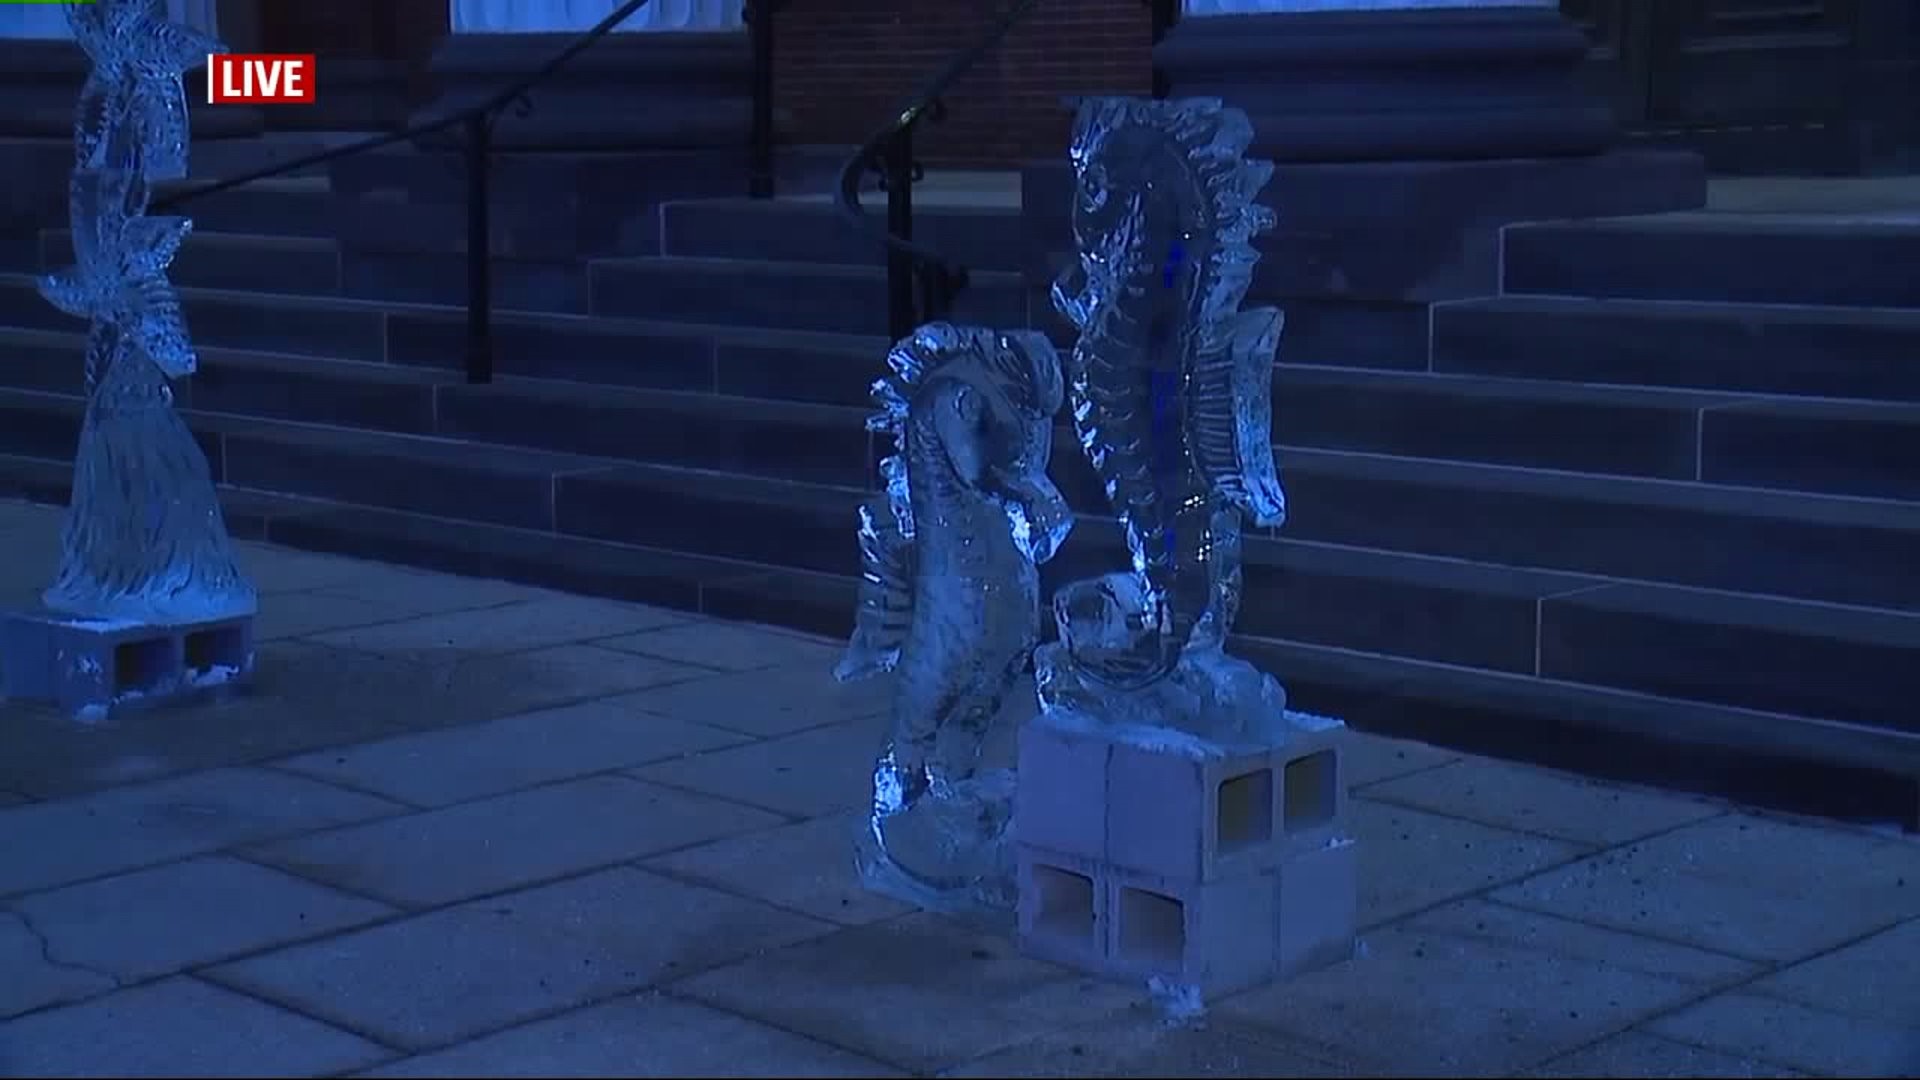 The 16th annual Icefest starts today in downtown Chambersburg